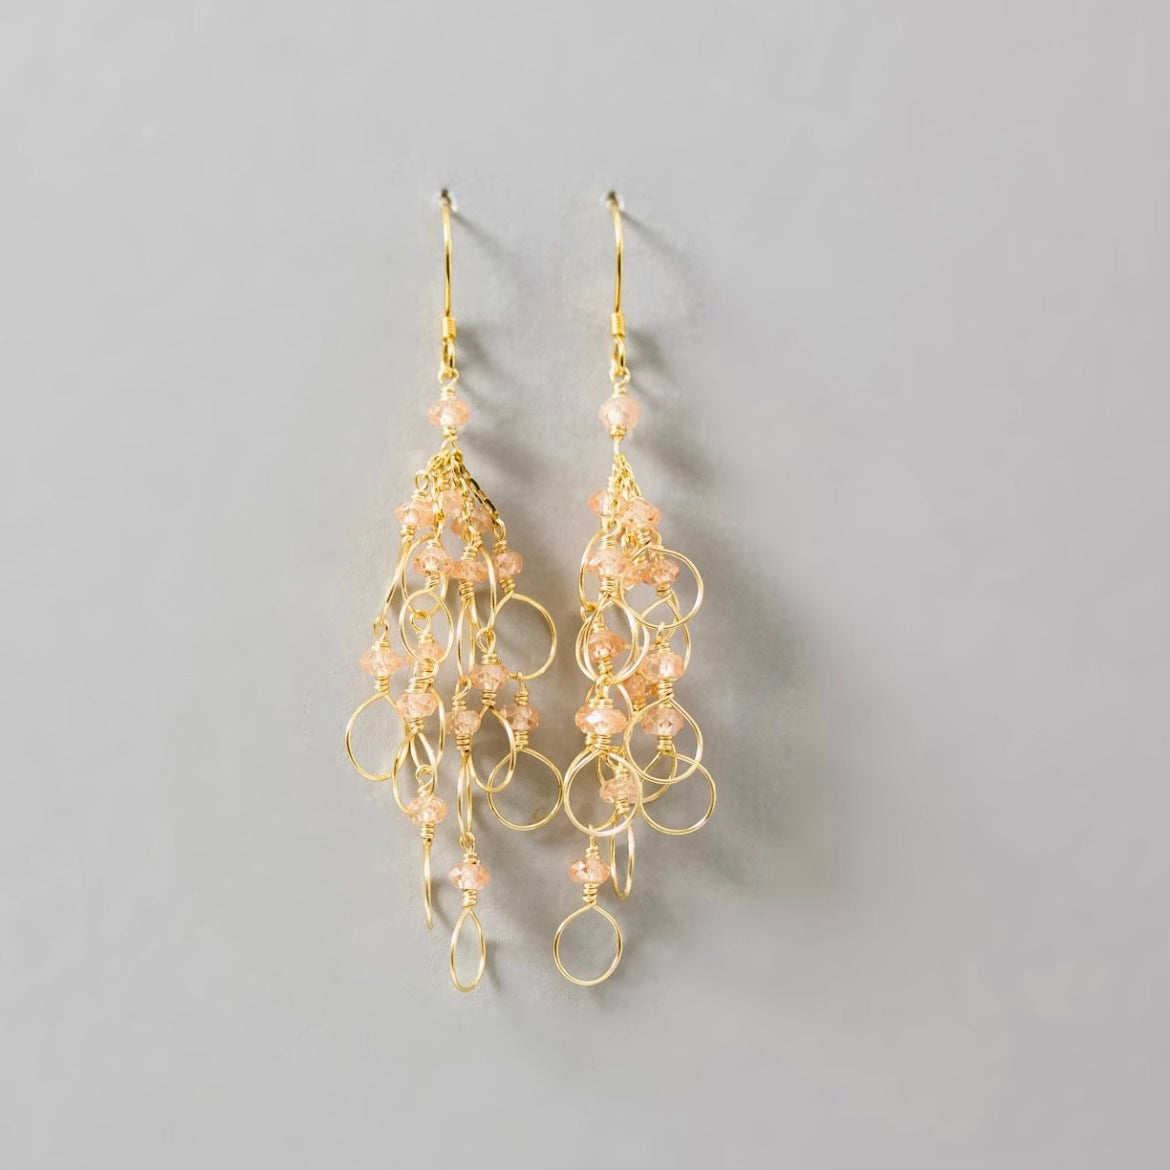 Elegant and Lightweight Design of Chain Loop Earrings with Champagne Quartz